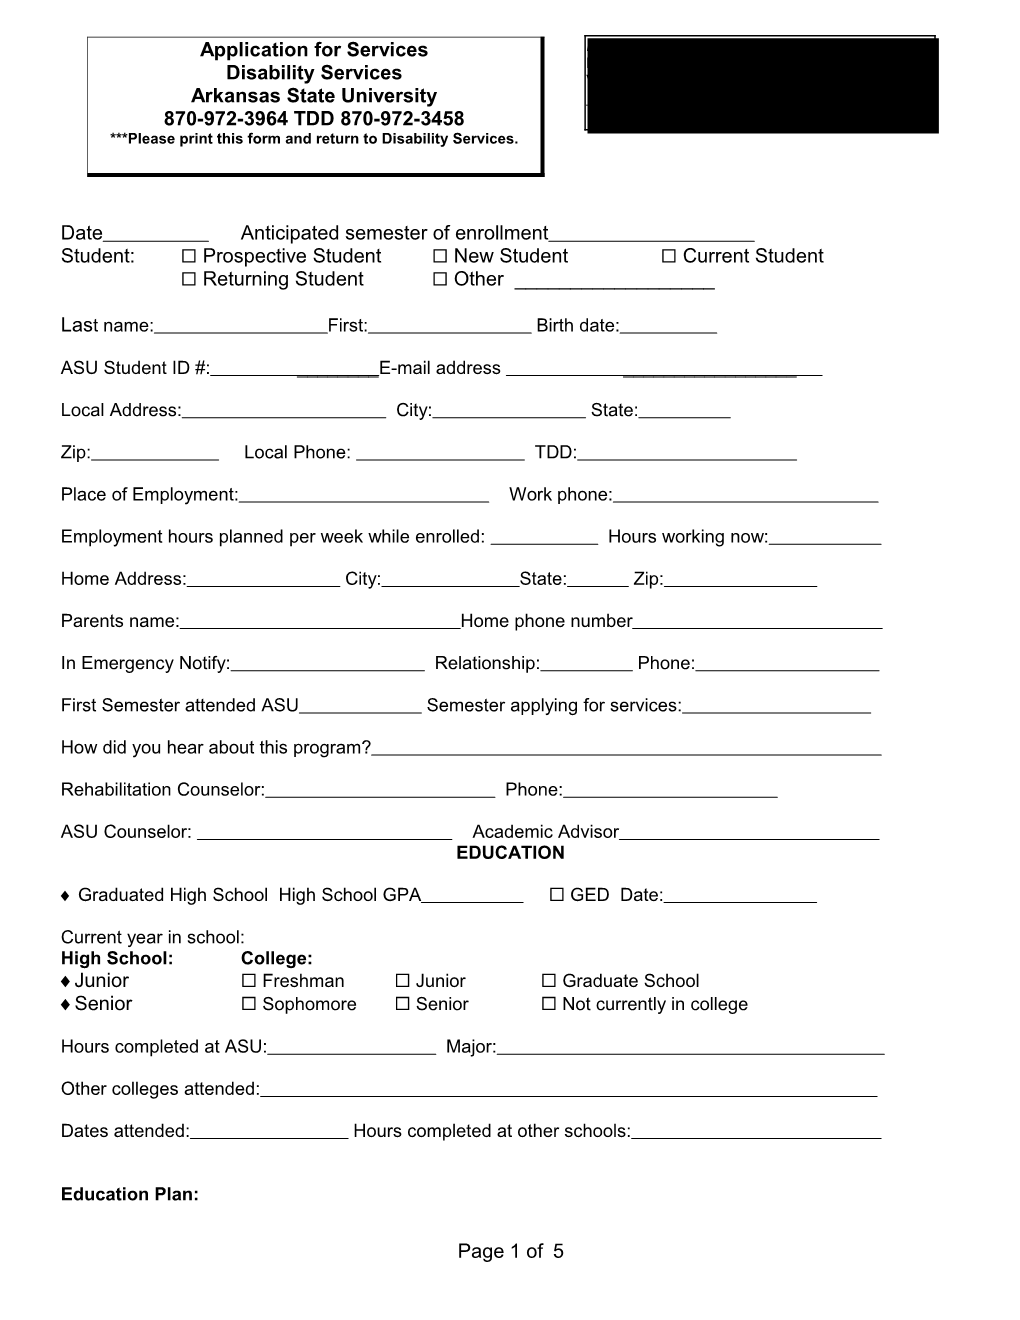 Please Print This Form and Return to Disability Services